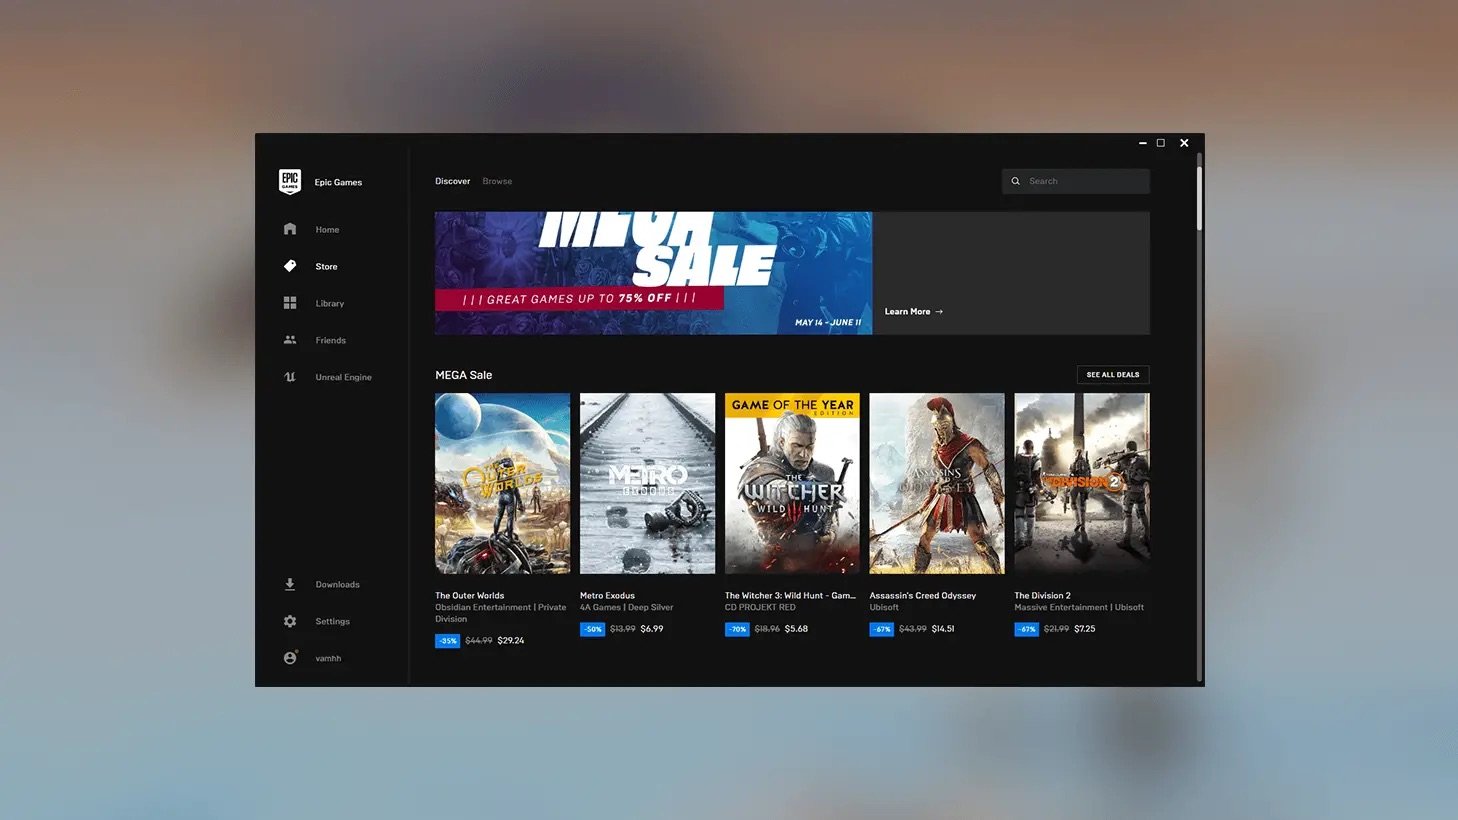 How To Download And Install Epic Games Launcher in Windows 11 